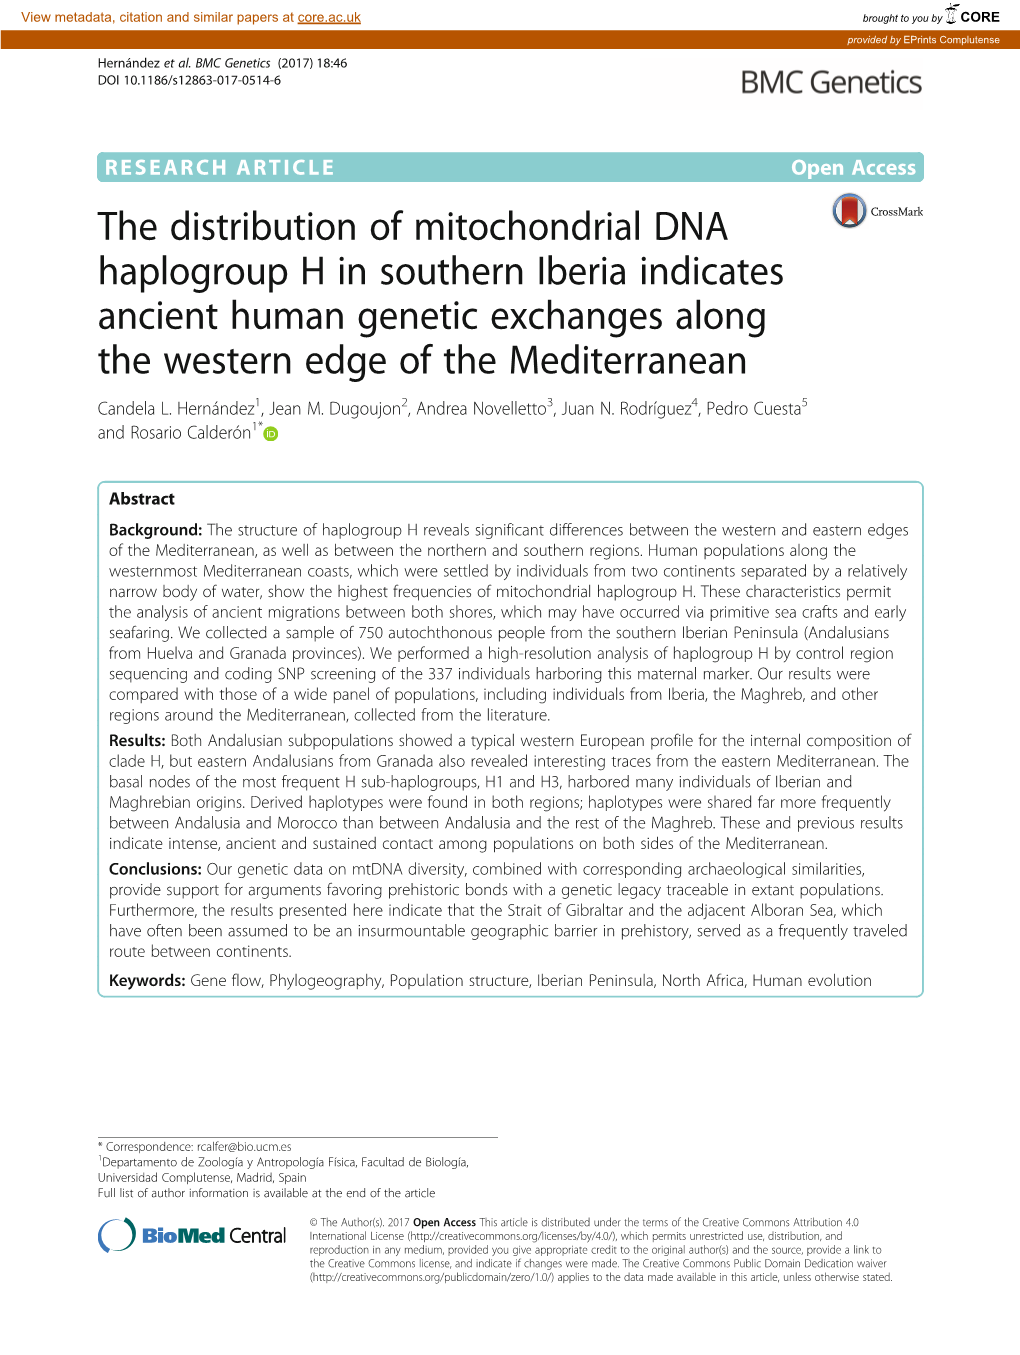 The Distribution of Mitochondrial DNA Haplogroup H in Southern Iberia Indicates Ancient Human Genetic Exchanges Along the Western Edge of the Mediterranean Candela L